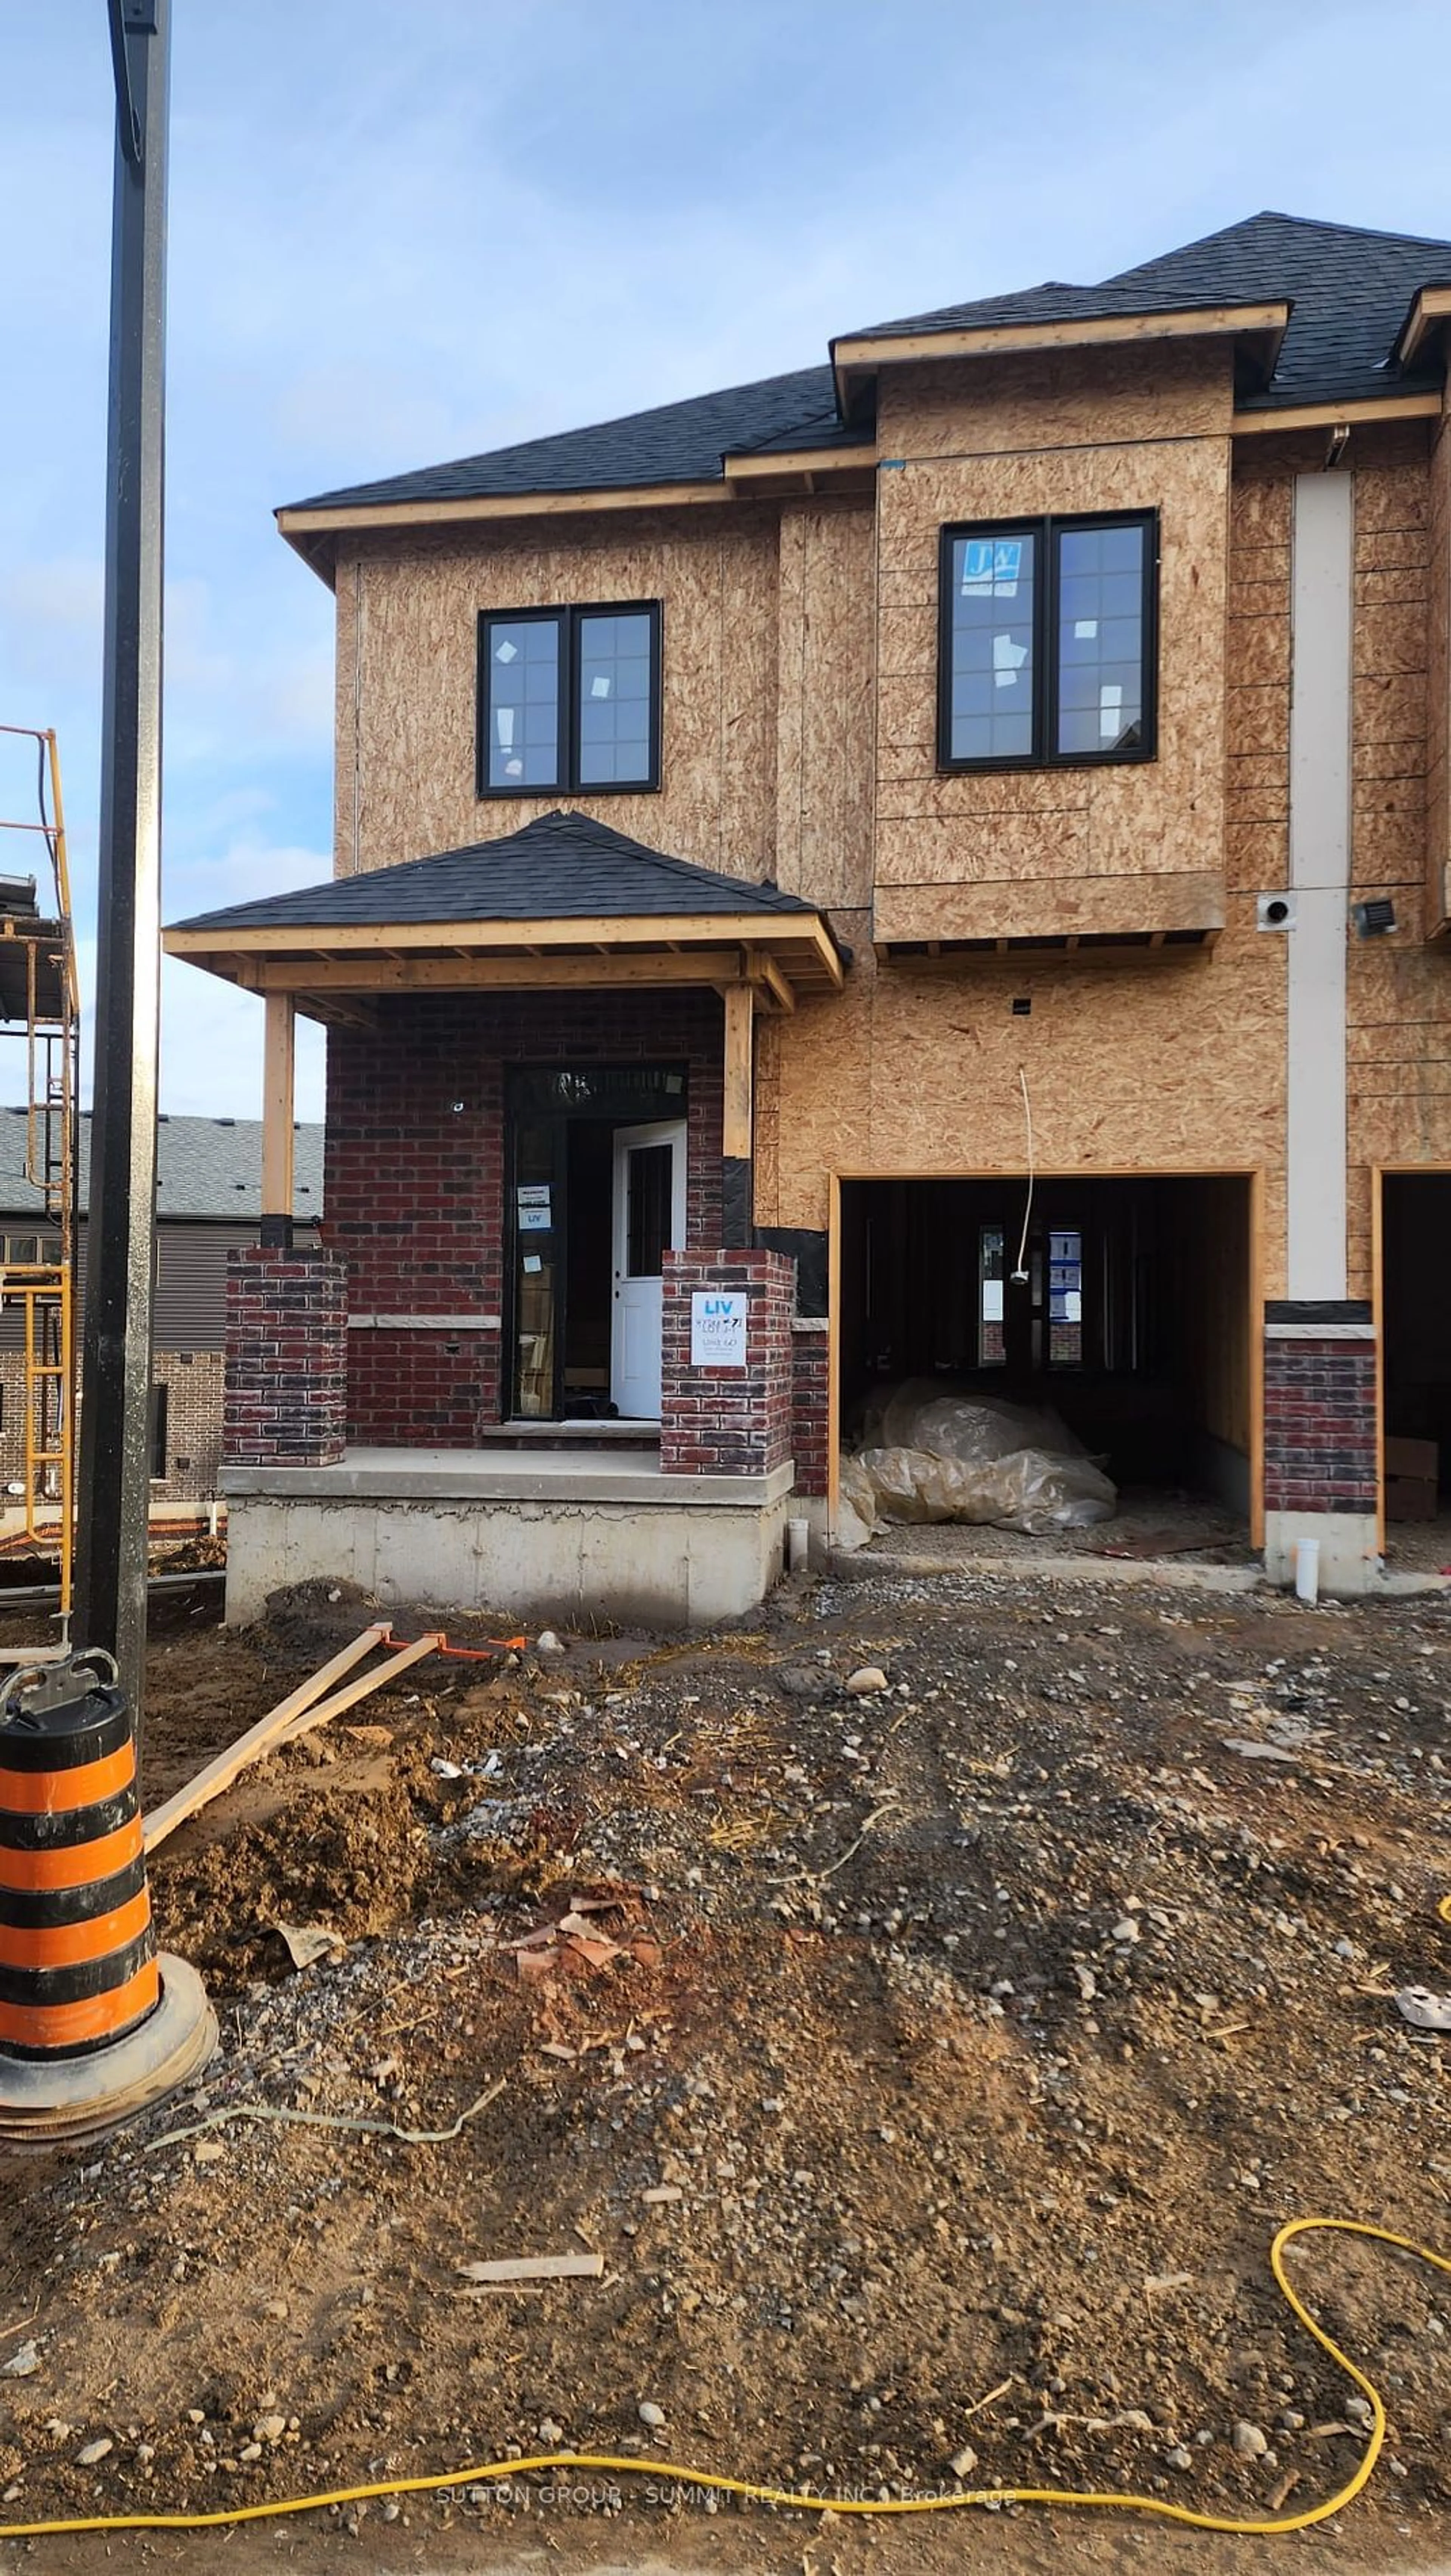 Home with brick exterior material for 620 Colborne St #66, Brantford Ontario N3T 5L5